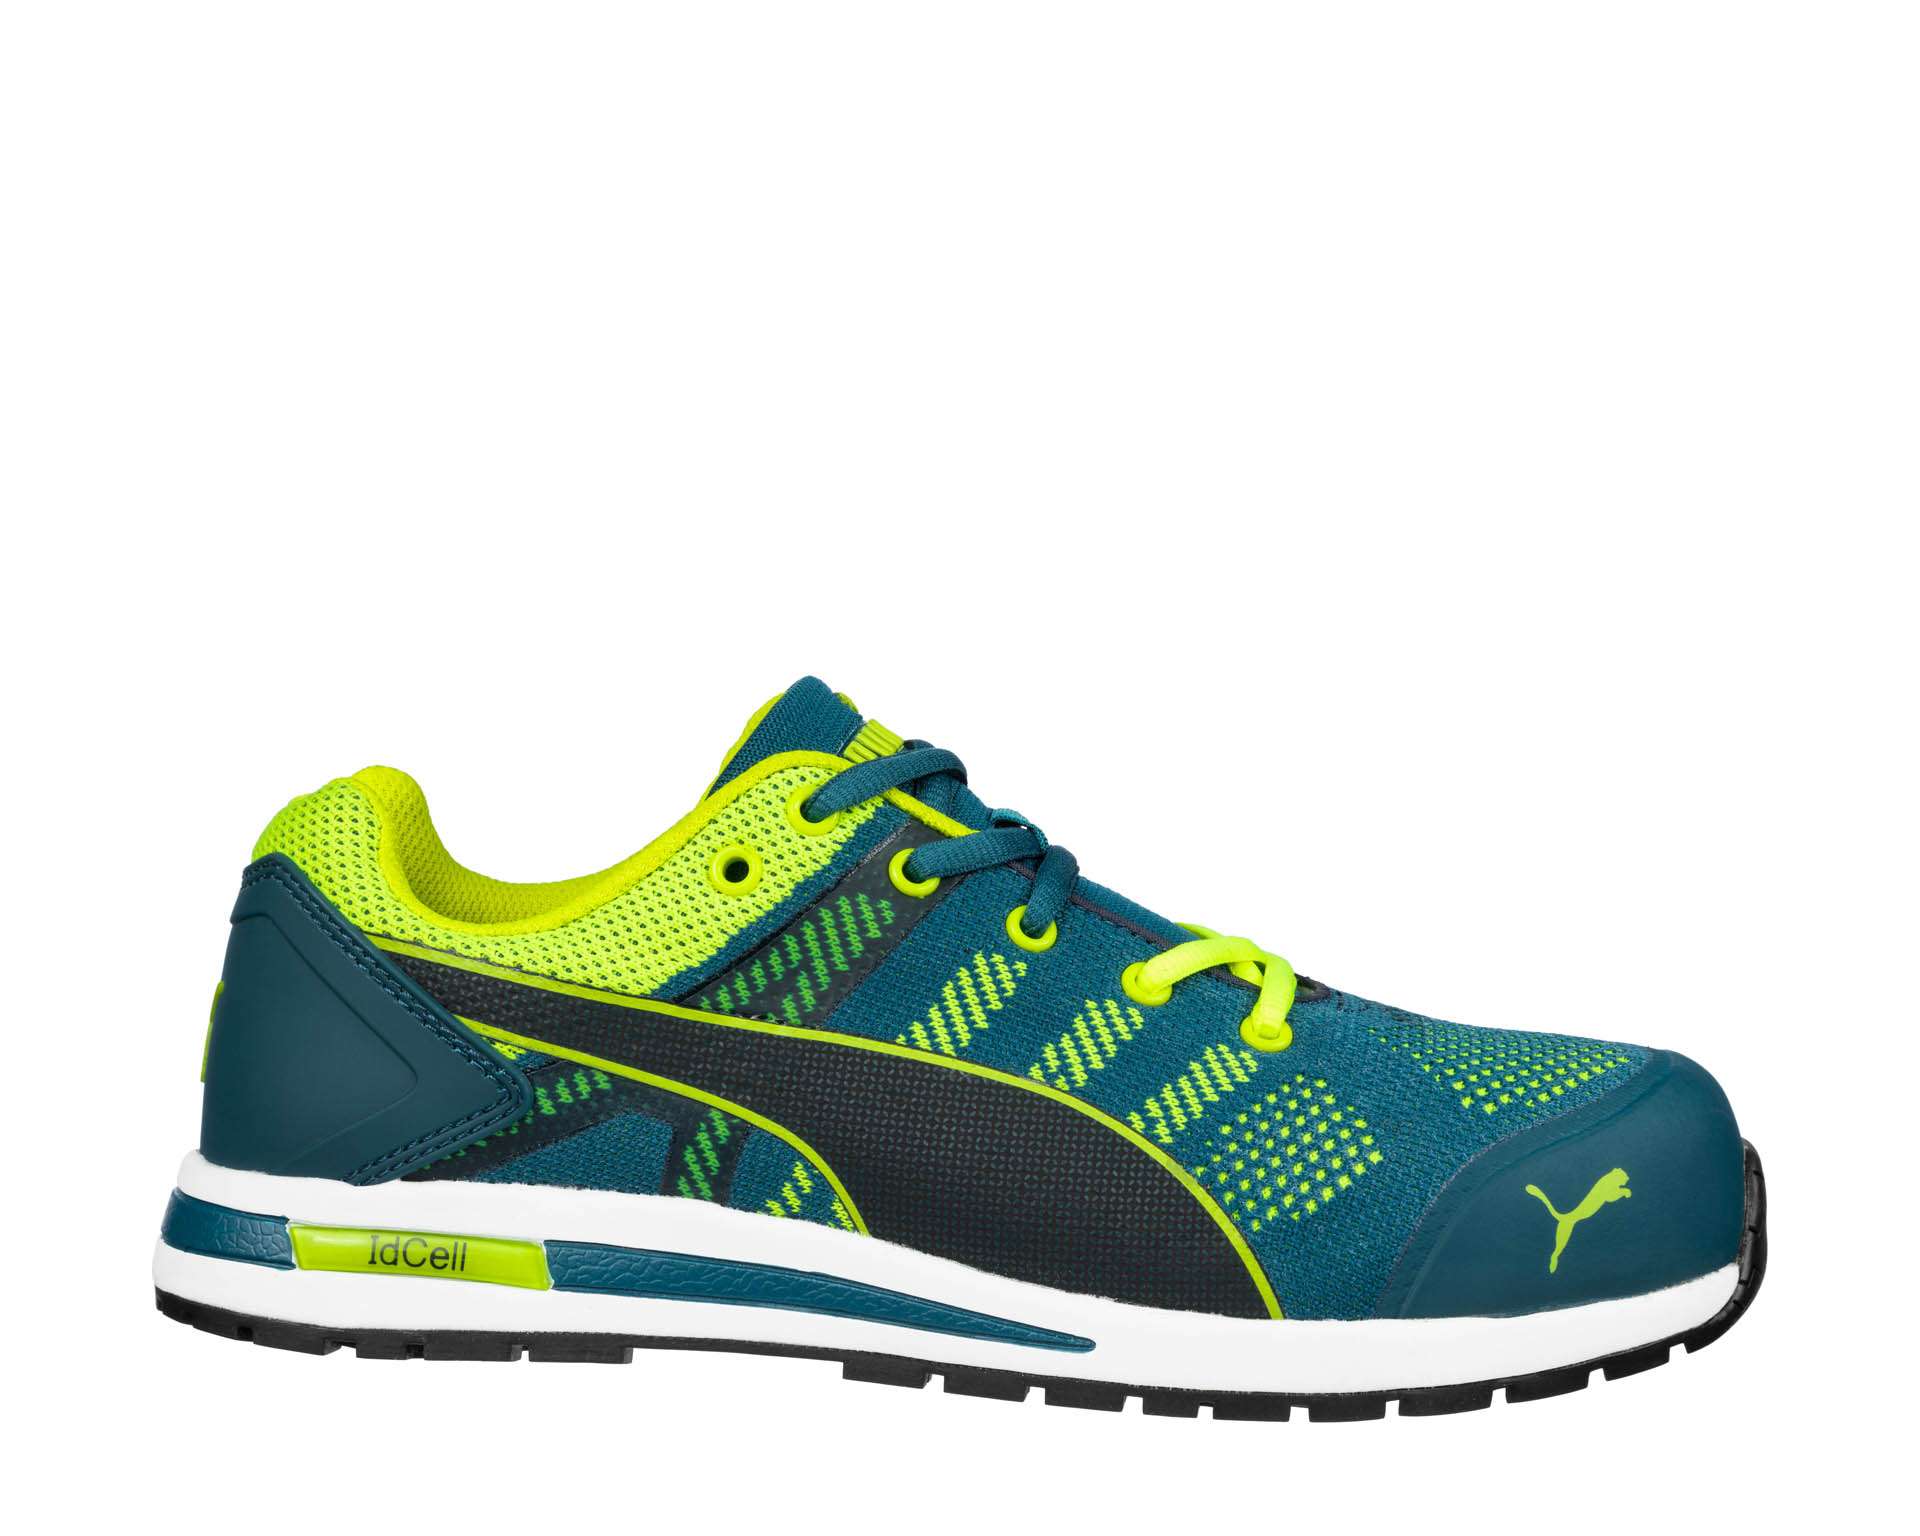 Puma Safety Elevate Knit Green Low Safety Trainer